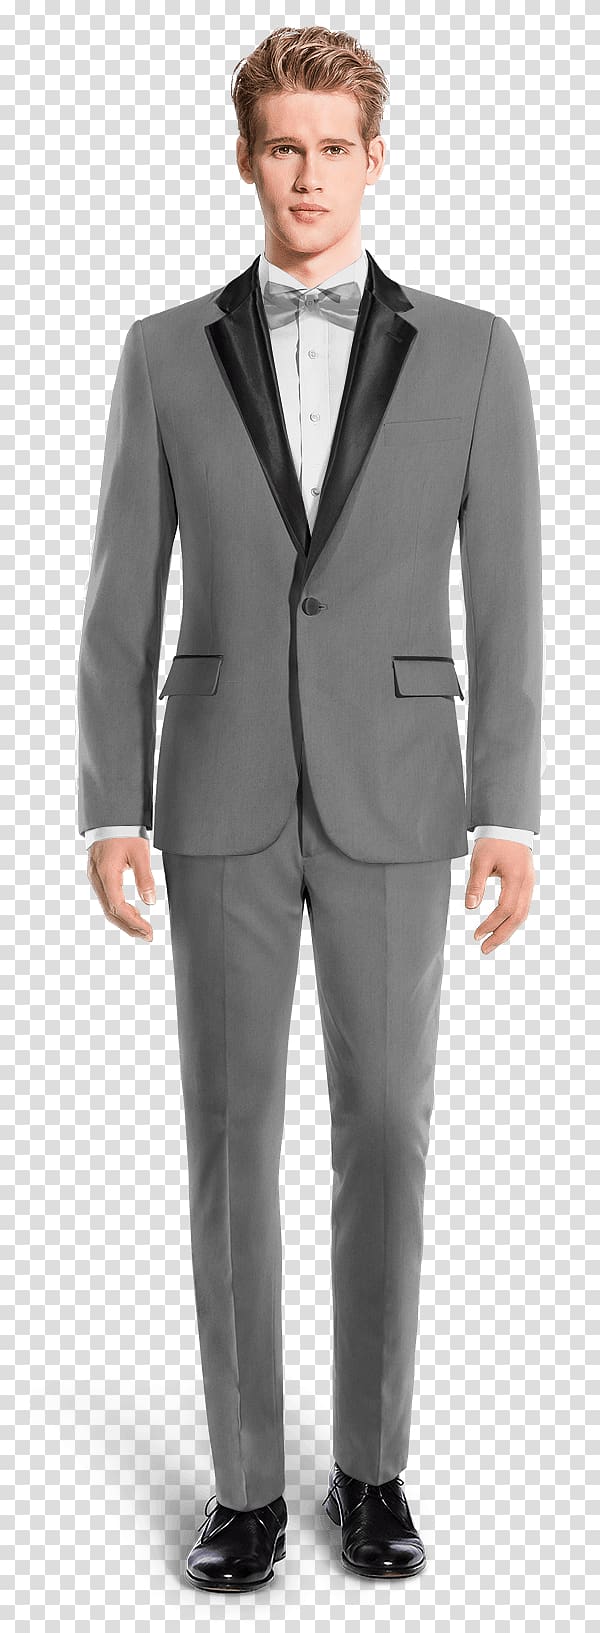 Suit Double-breasted Jacket Coat Tweed, man smoking transparent background PNG clipart